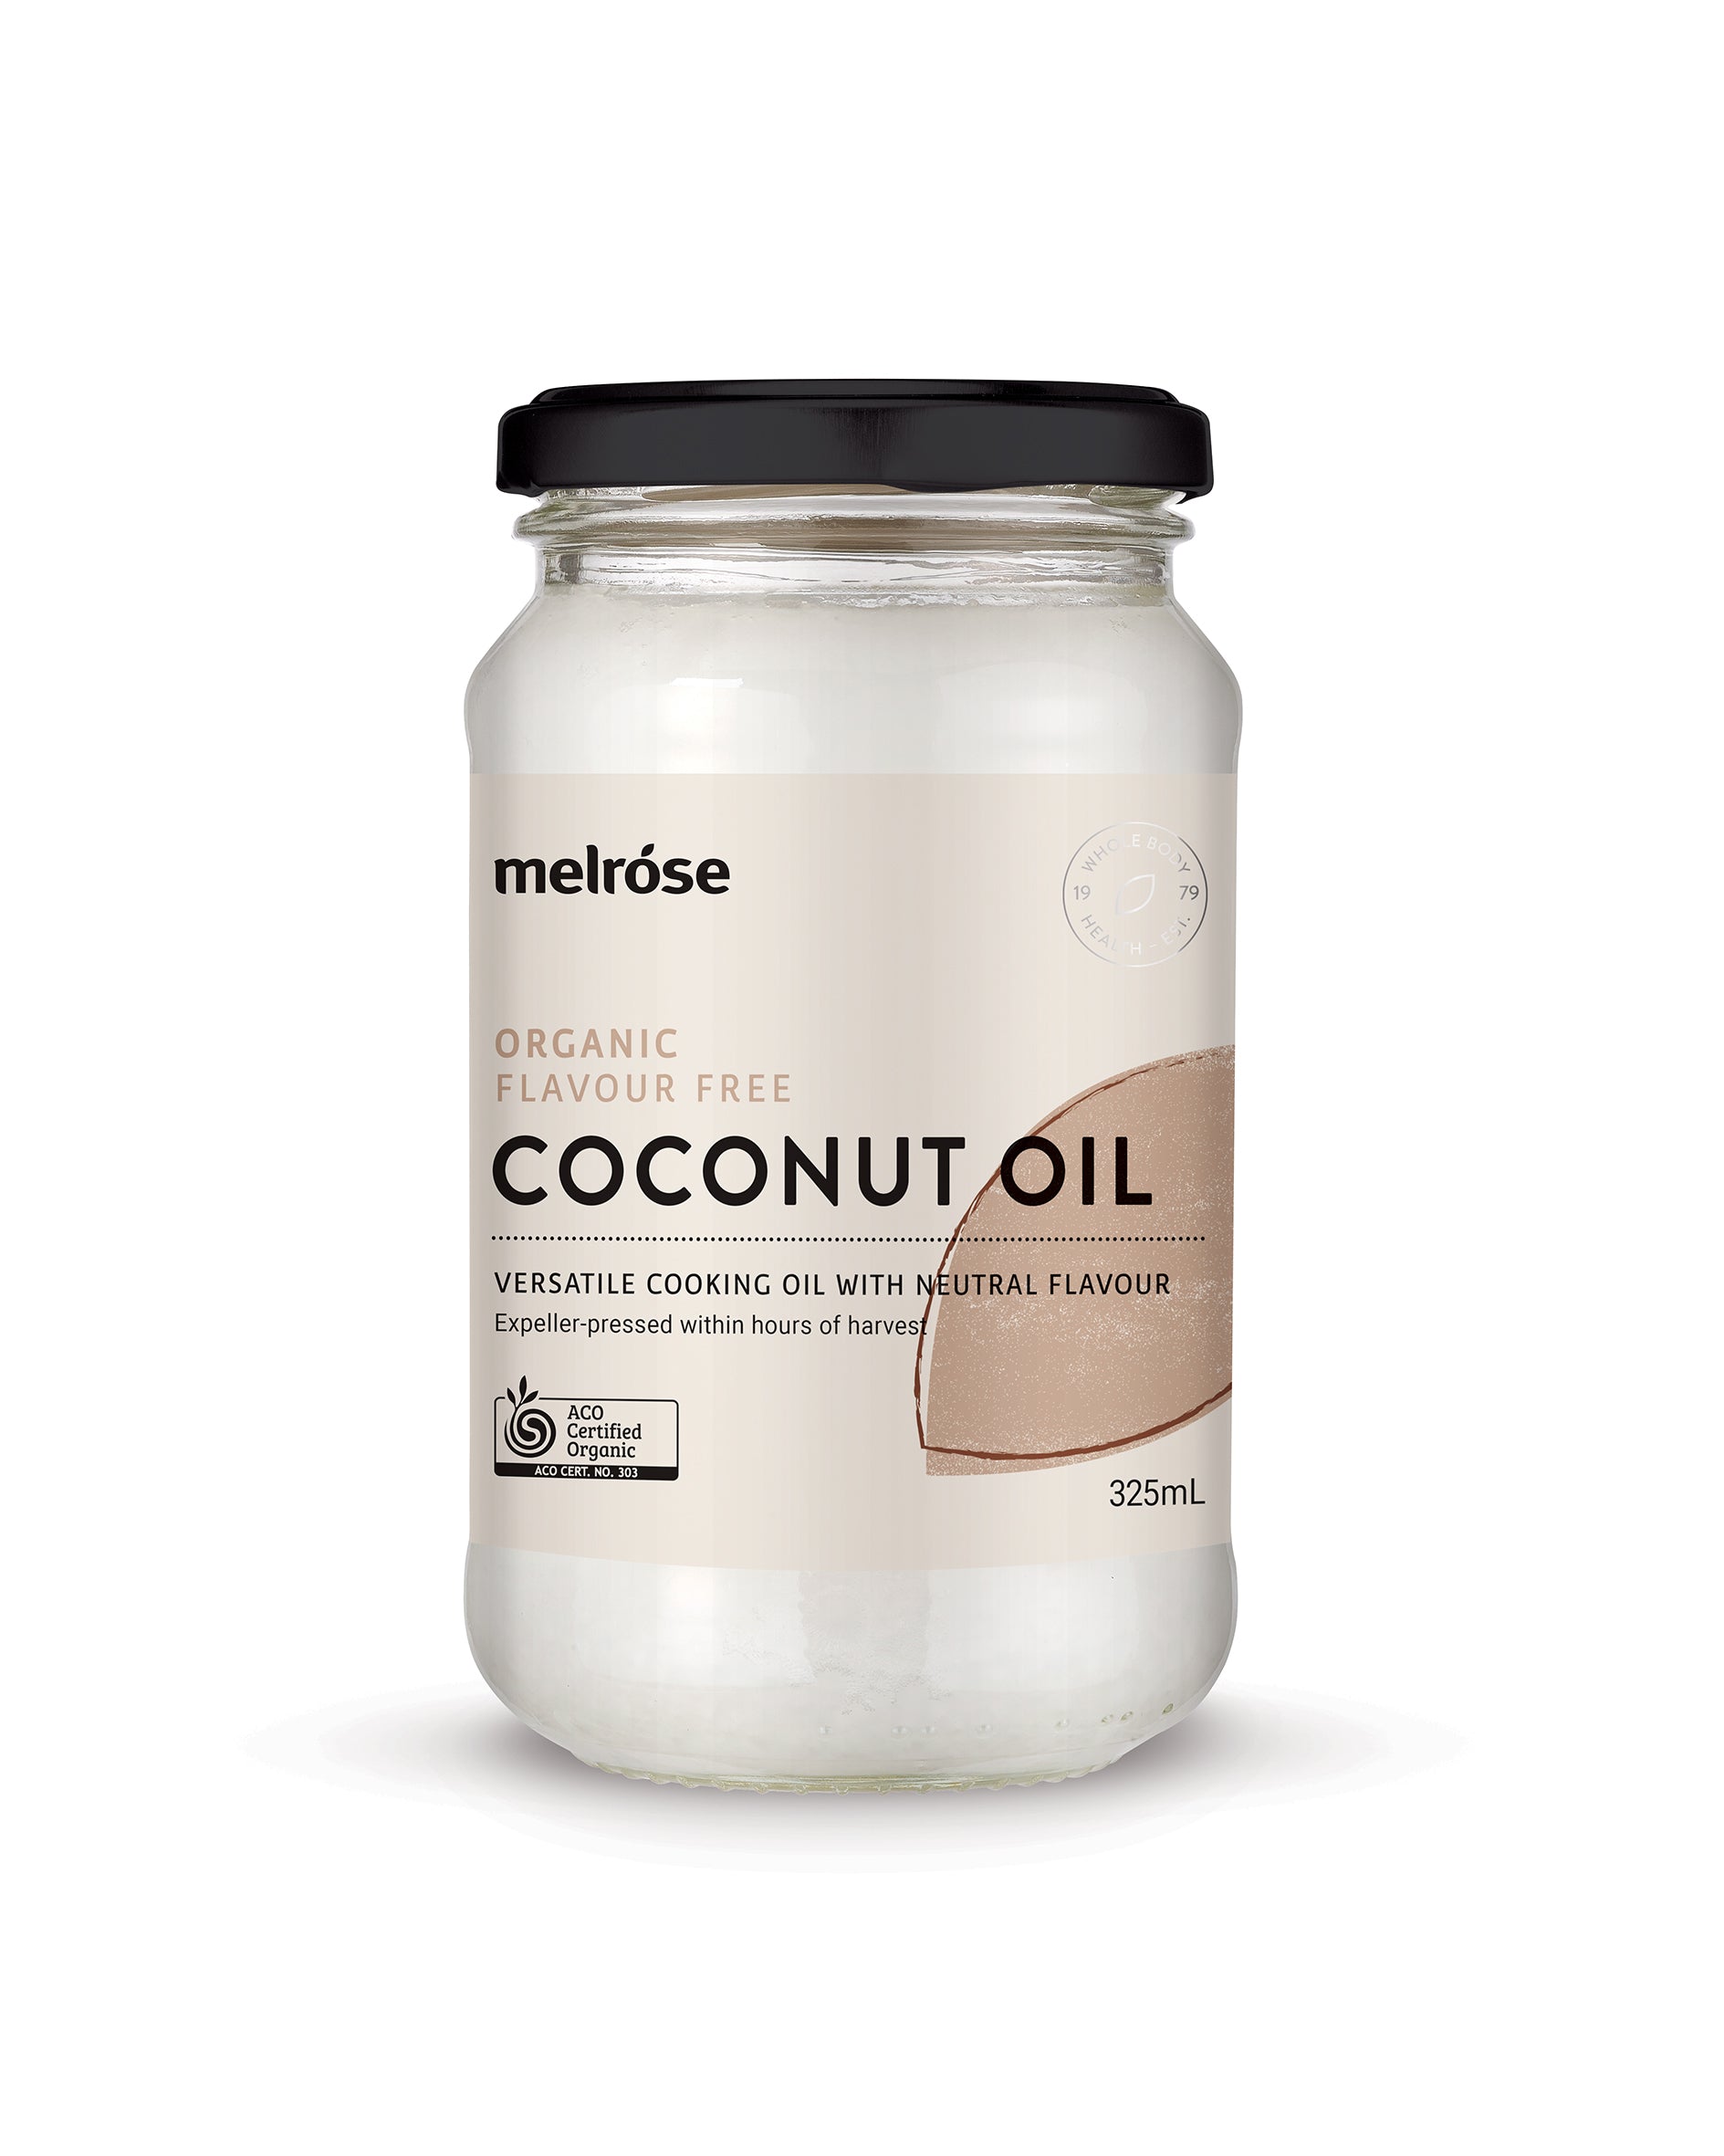 Melrose Organic Coconut Oil Flavour Free